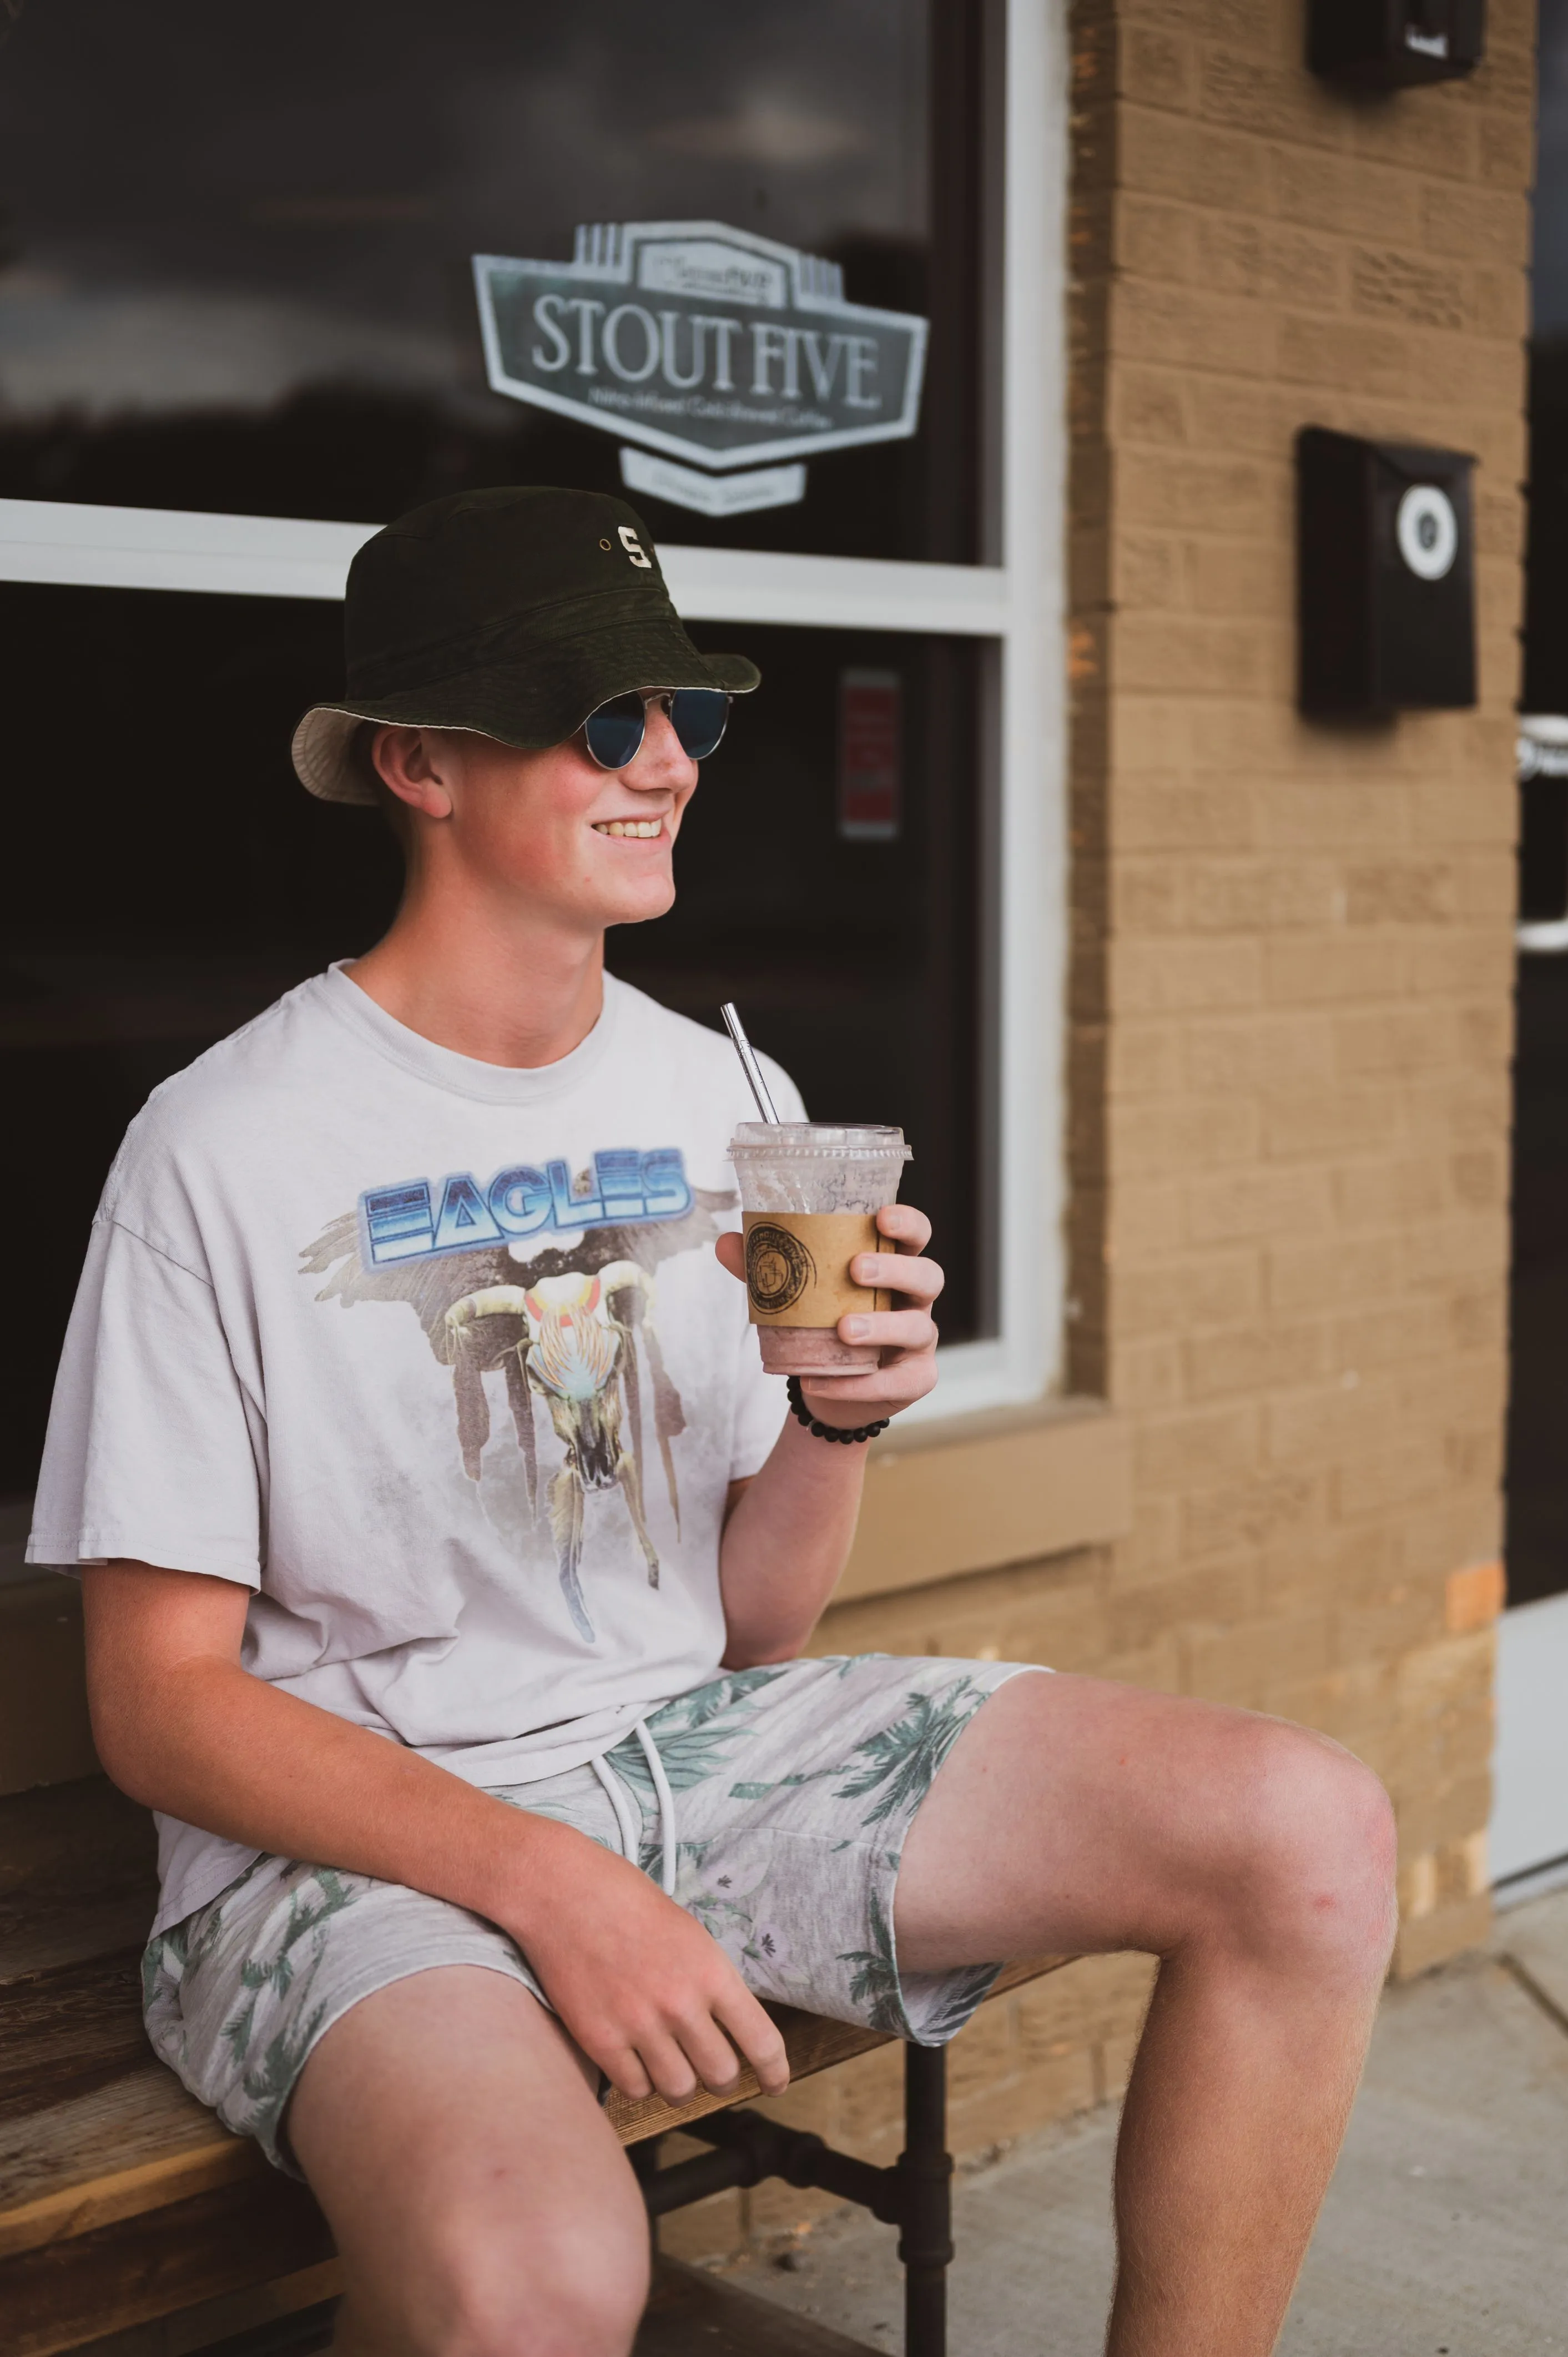 Smiling young person sitting on a bench outside a café, wearing a bucket hat and sunglasses, holding an iced coffee drink.